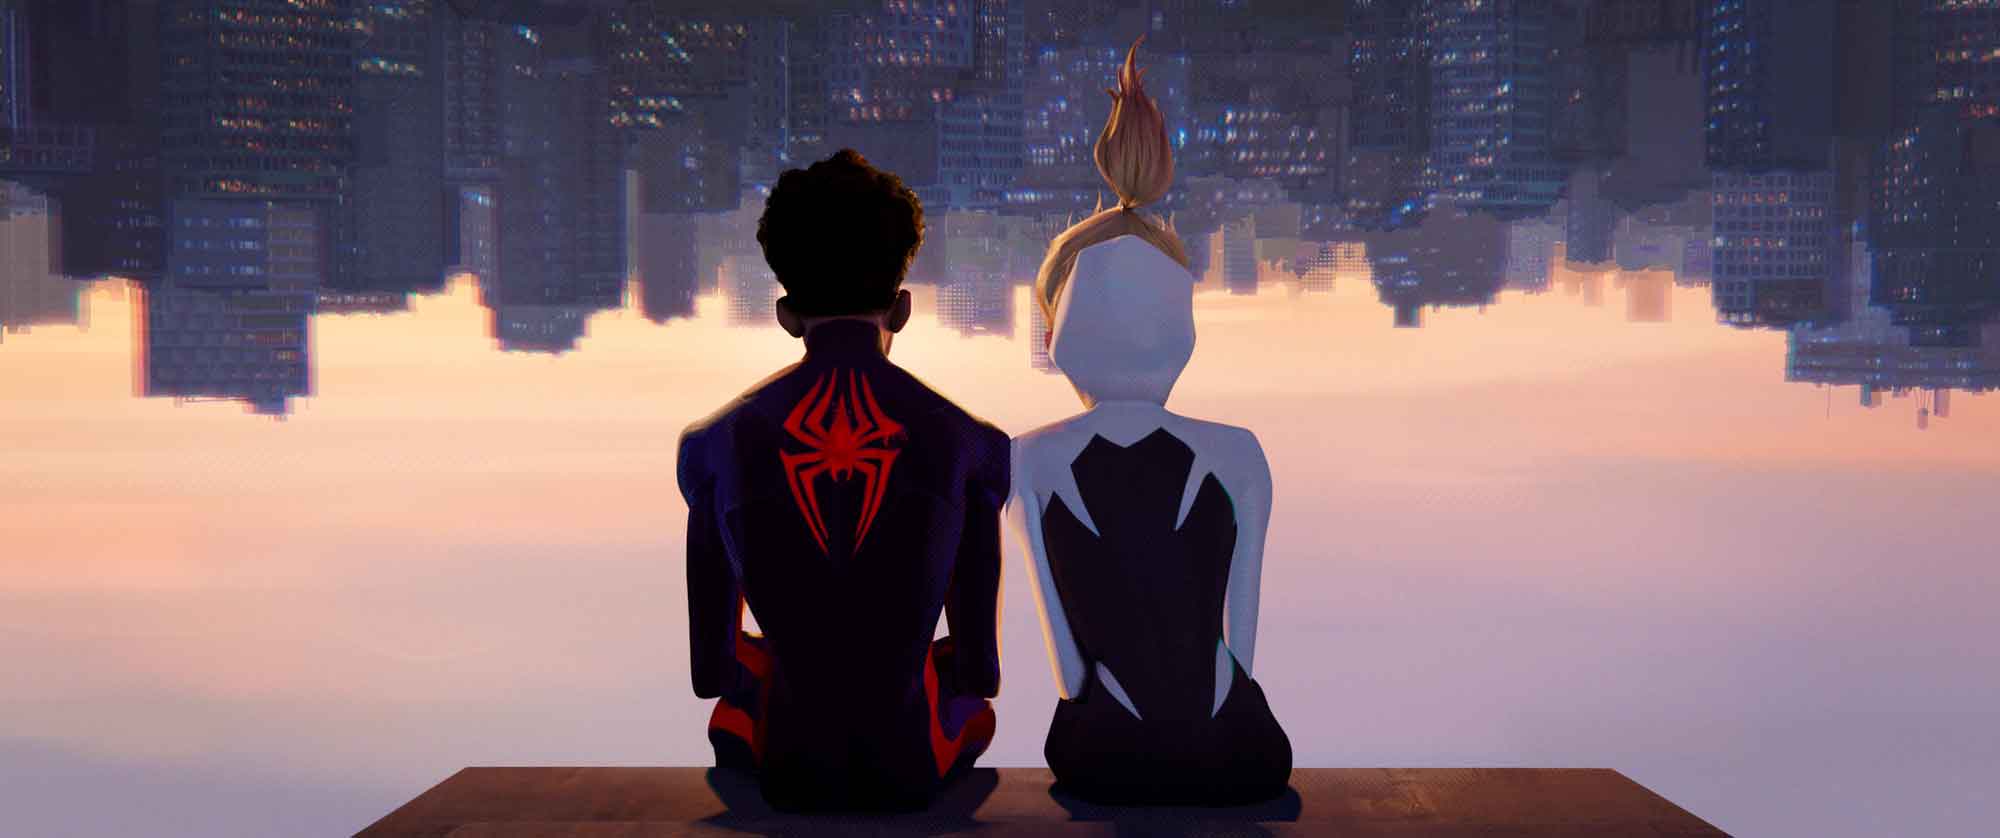 Spider-Man-Across-The-Spiderverse_6